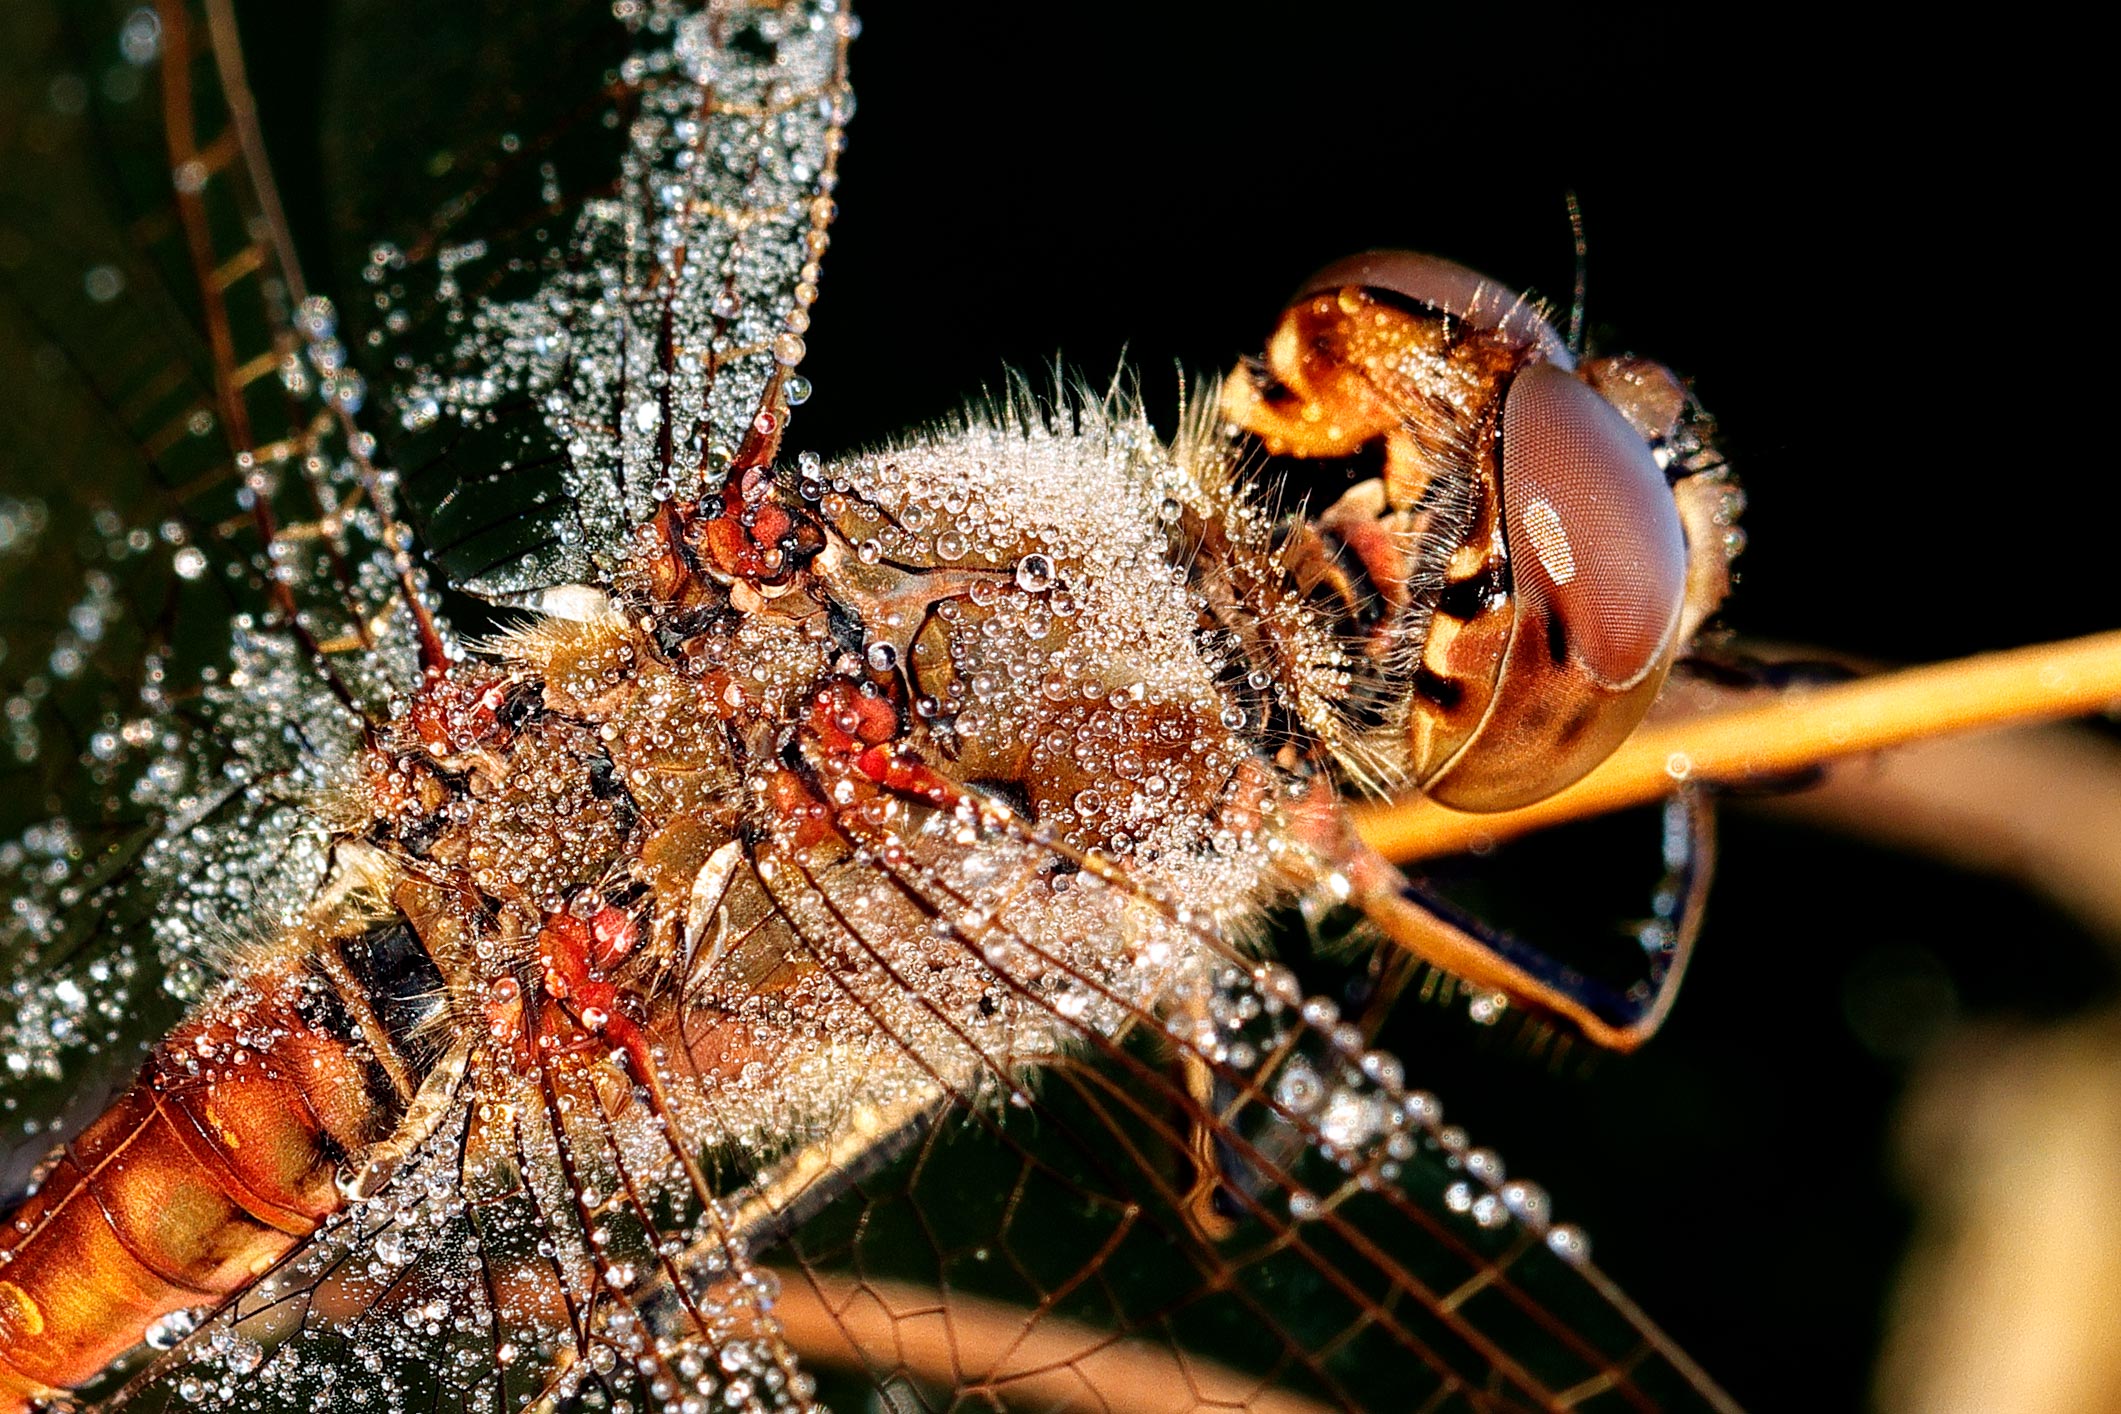 Dragonfly with dew...